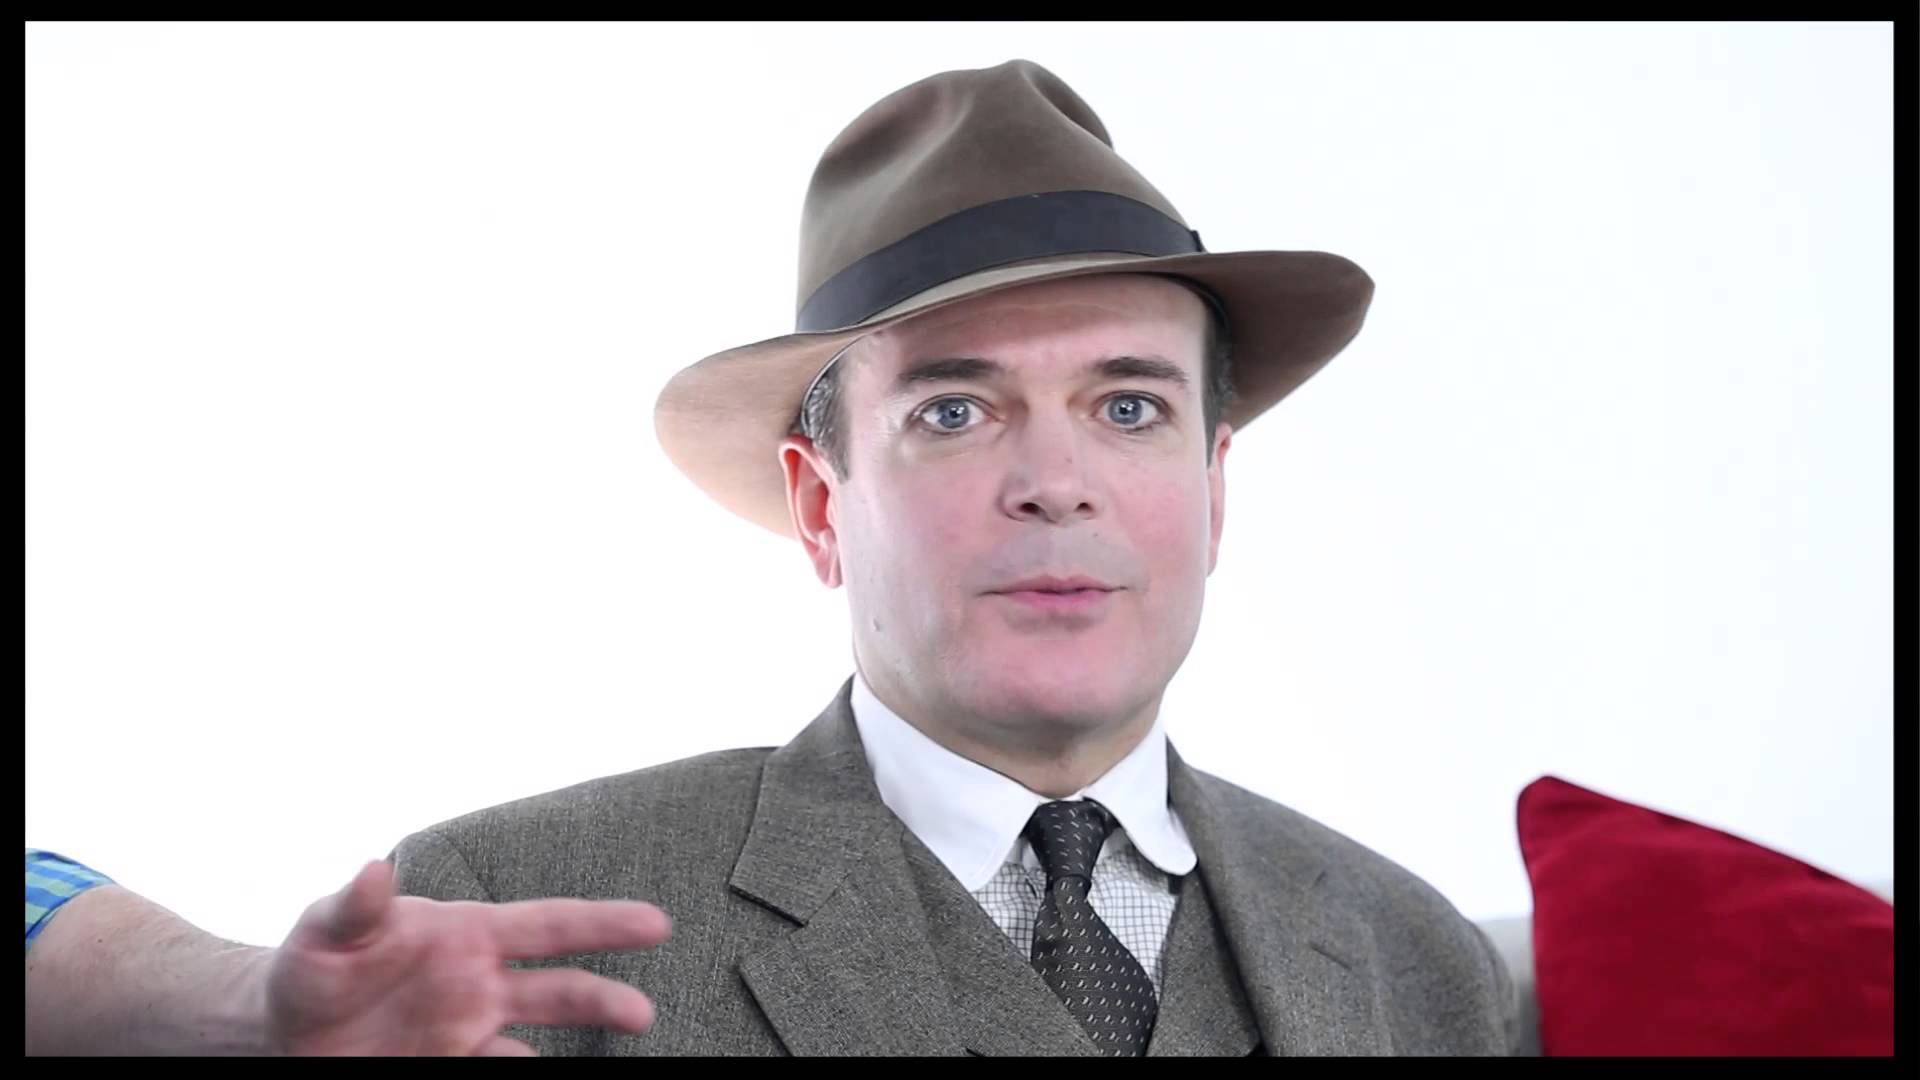 Original Broadway cast members Jefferson Mays and Bryce Pinkham answer your questions
